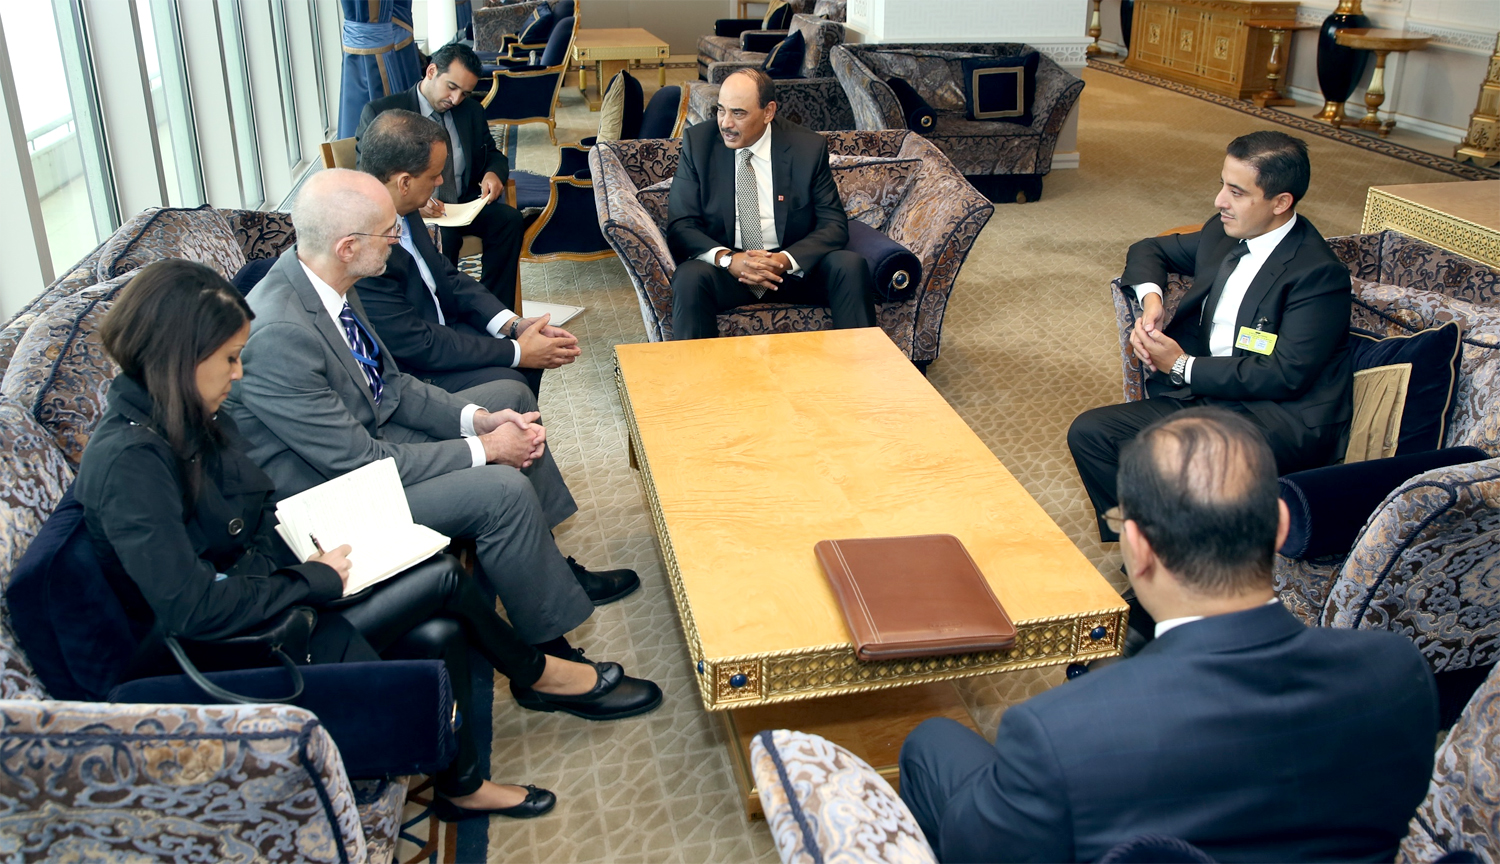 First Deputy Prime Minister and Minister of Foreign Affairs Sheikh Sabah Al-Khaled Al-Hamad Al-Sabah with the UN Secretary General's Special Envoy for Yemen Ismail Ould Cheikh Ahmed